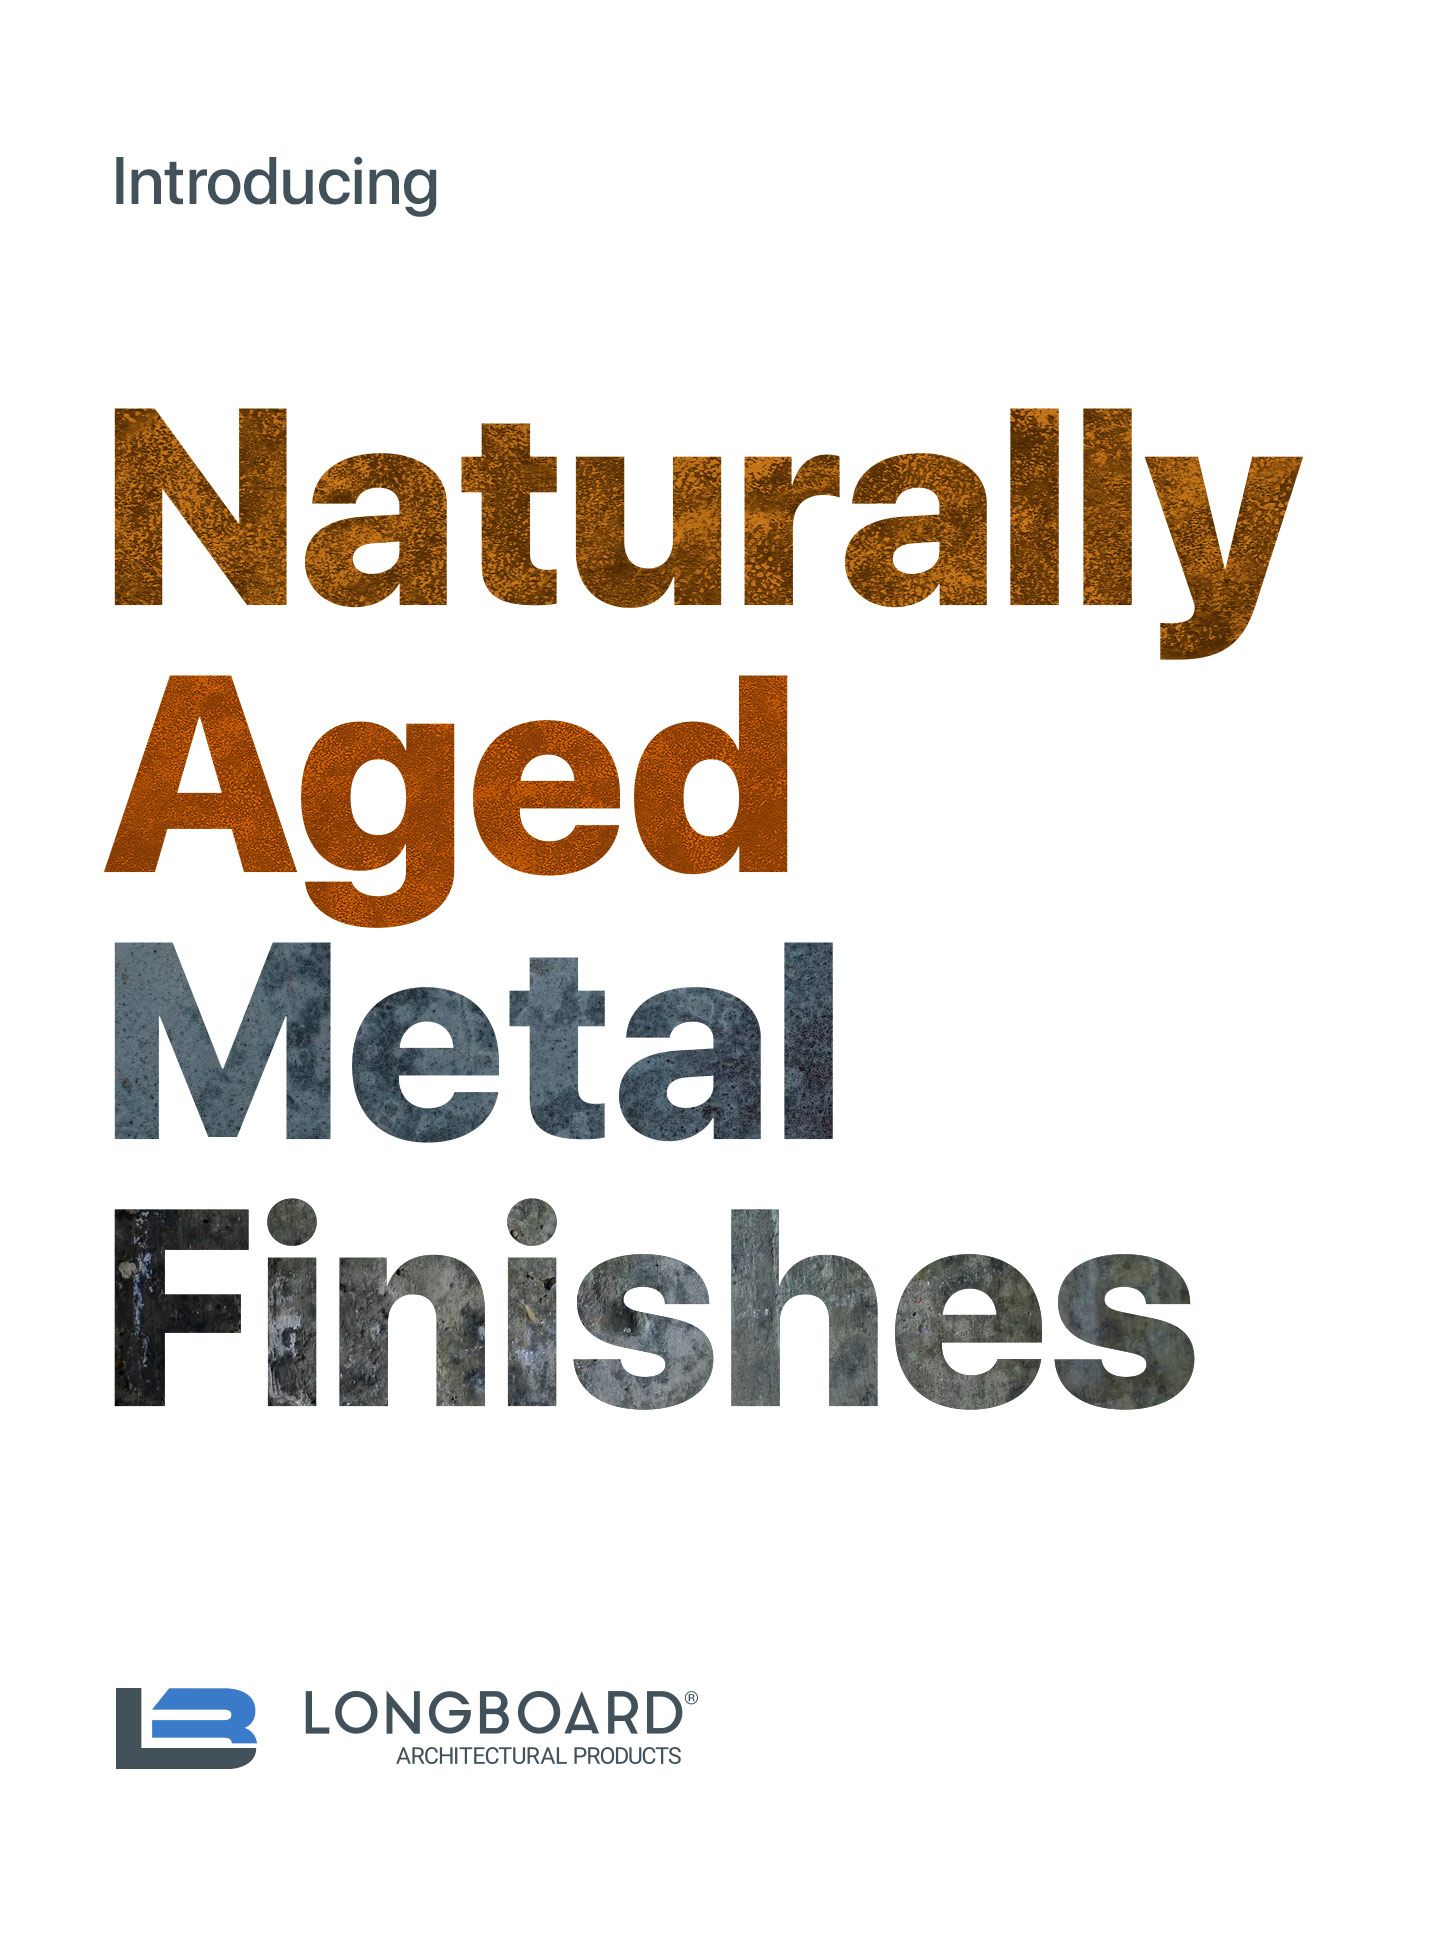 Longboard® Announces New Line of Naturally Aged Metal Finishes